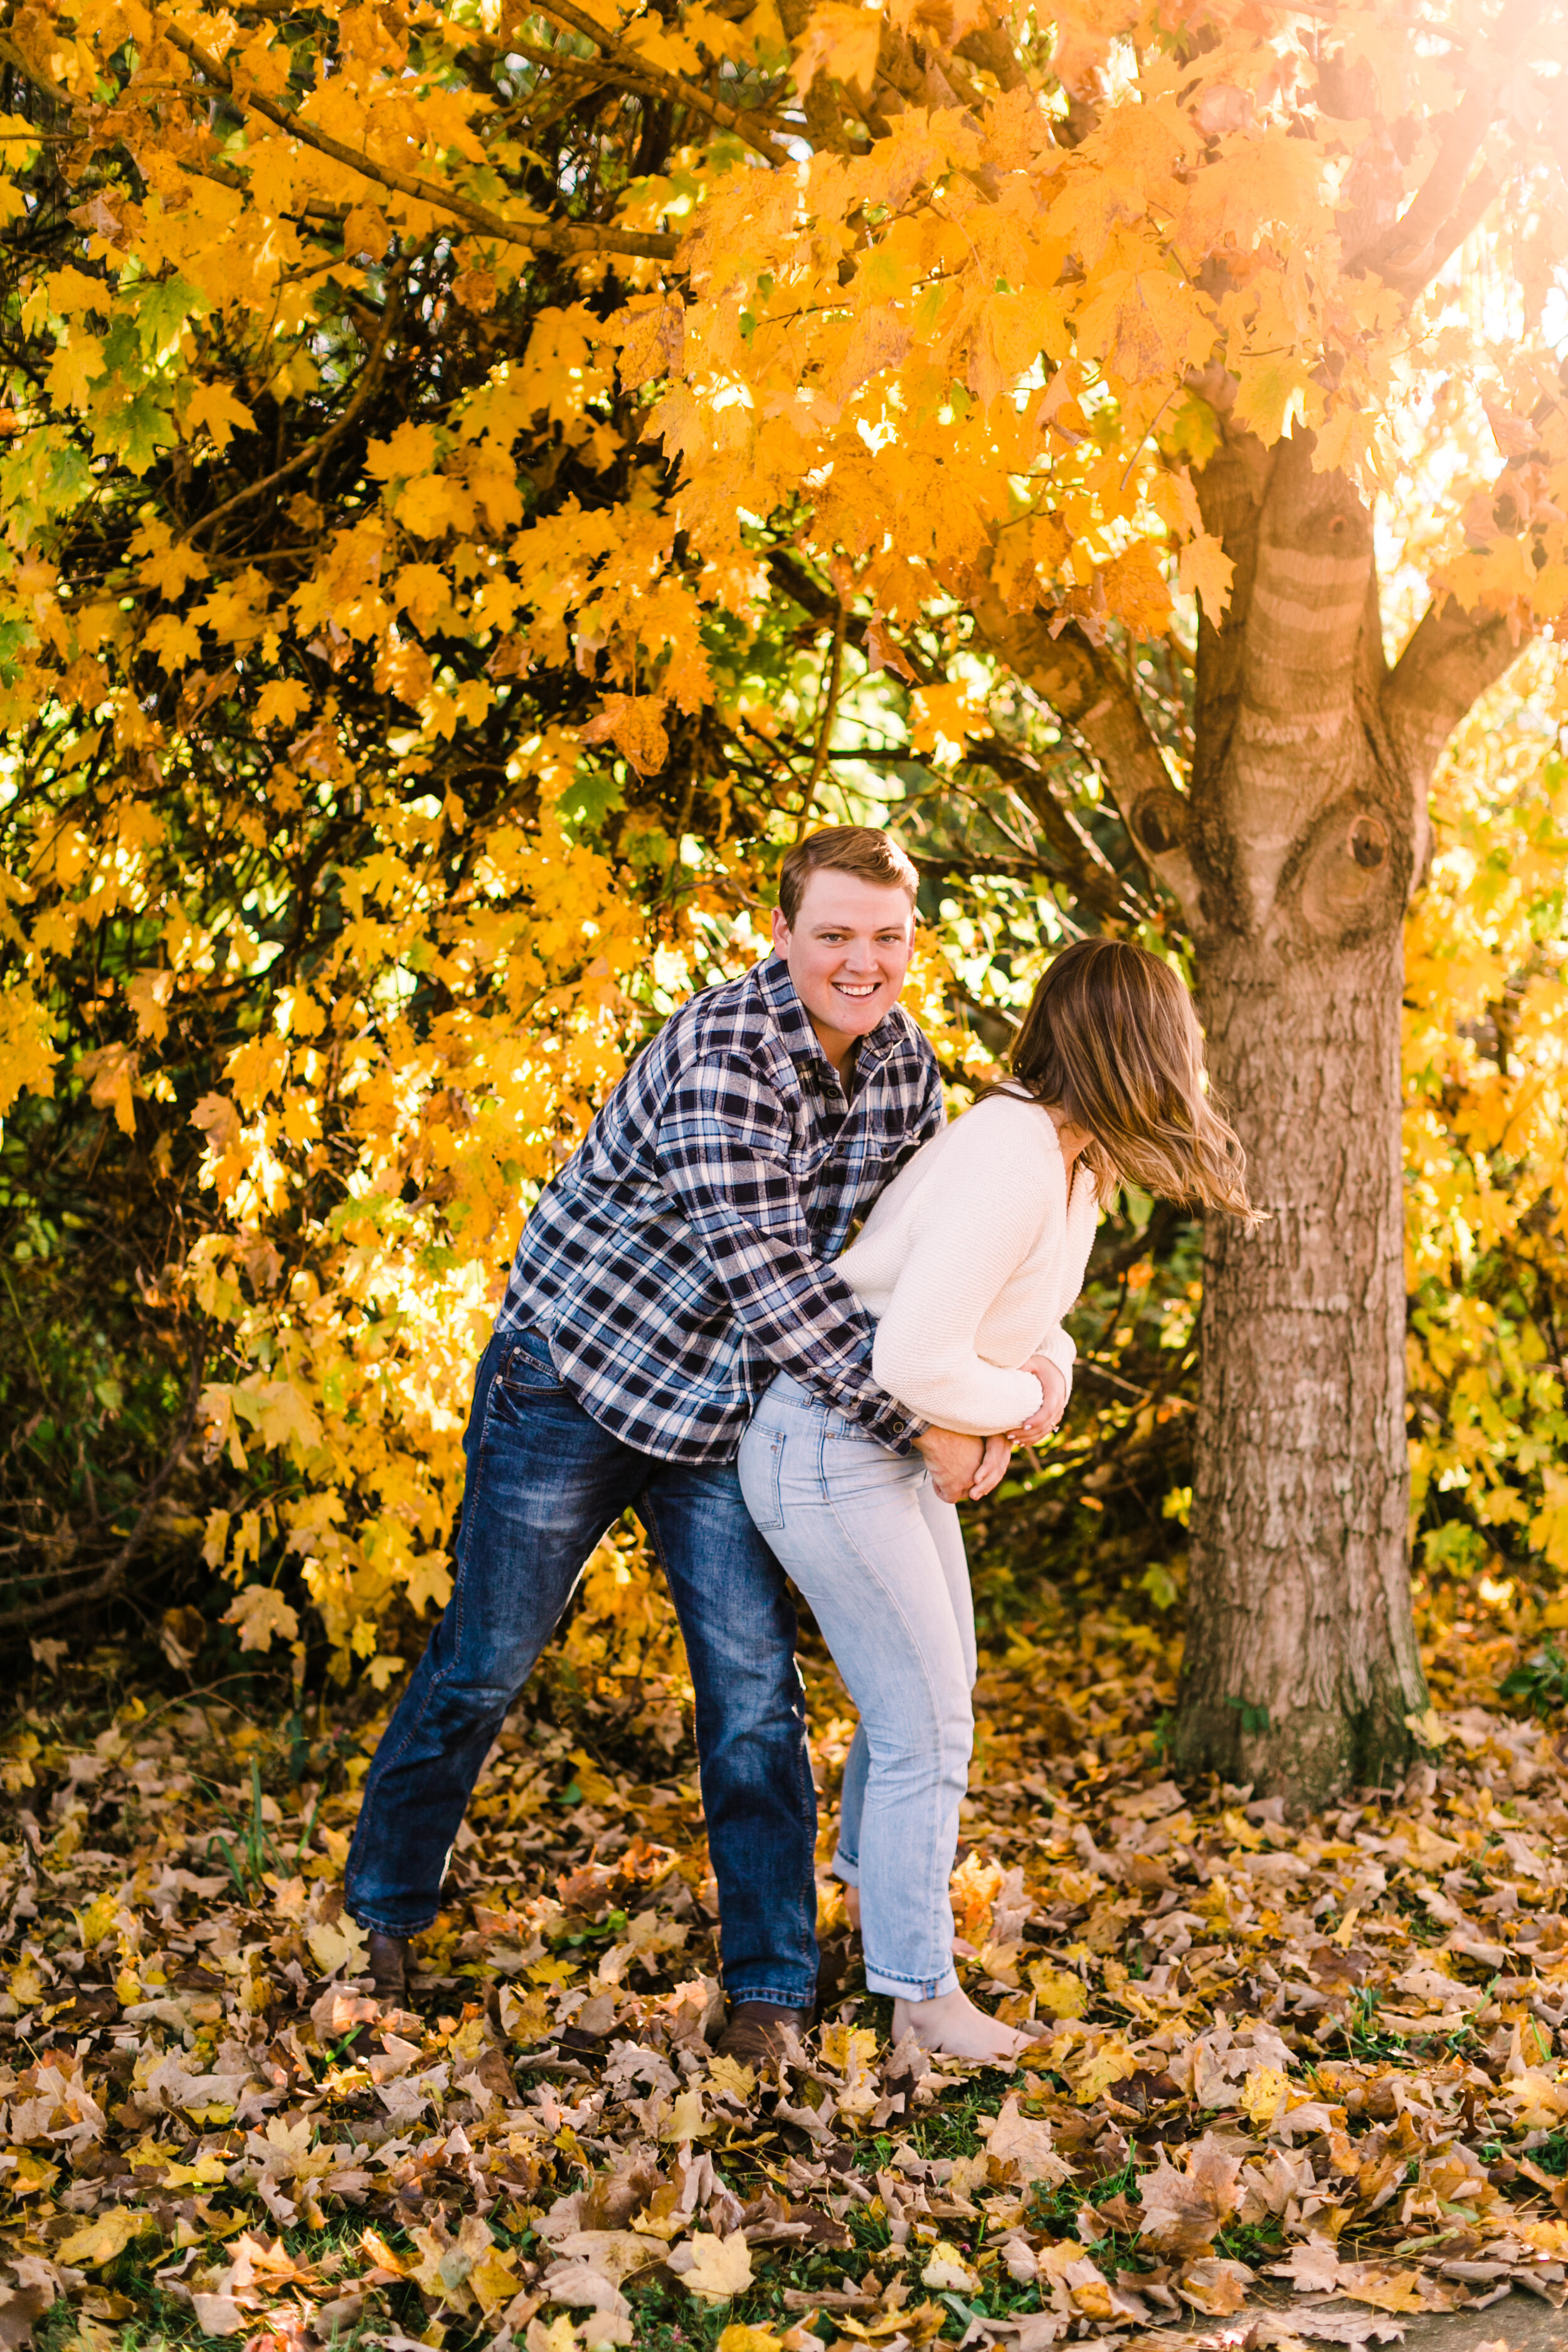 Tennessee+Fall+Engagement+Photos+Puppy (26 of 63).jpg